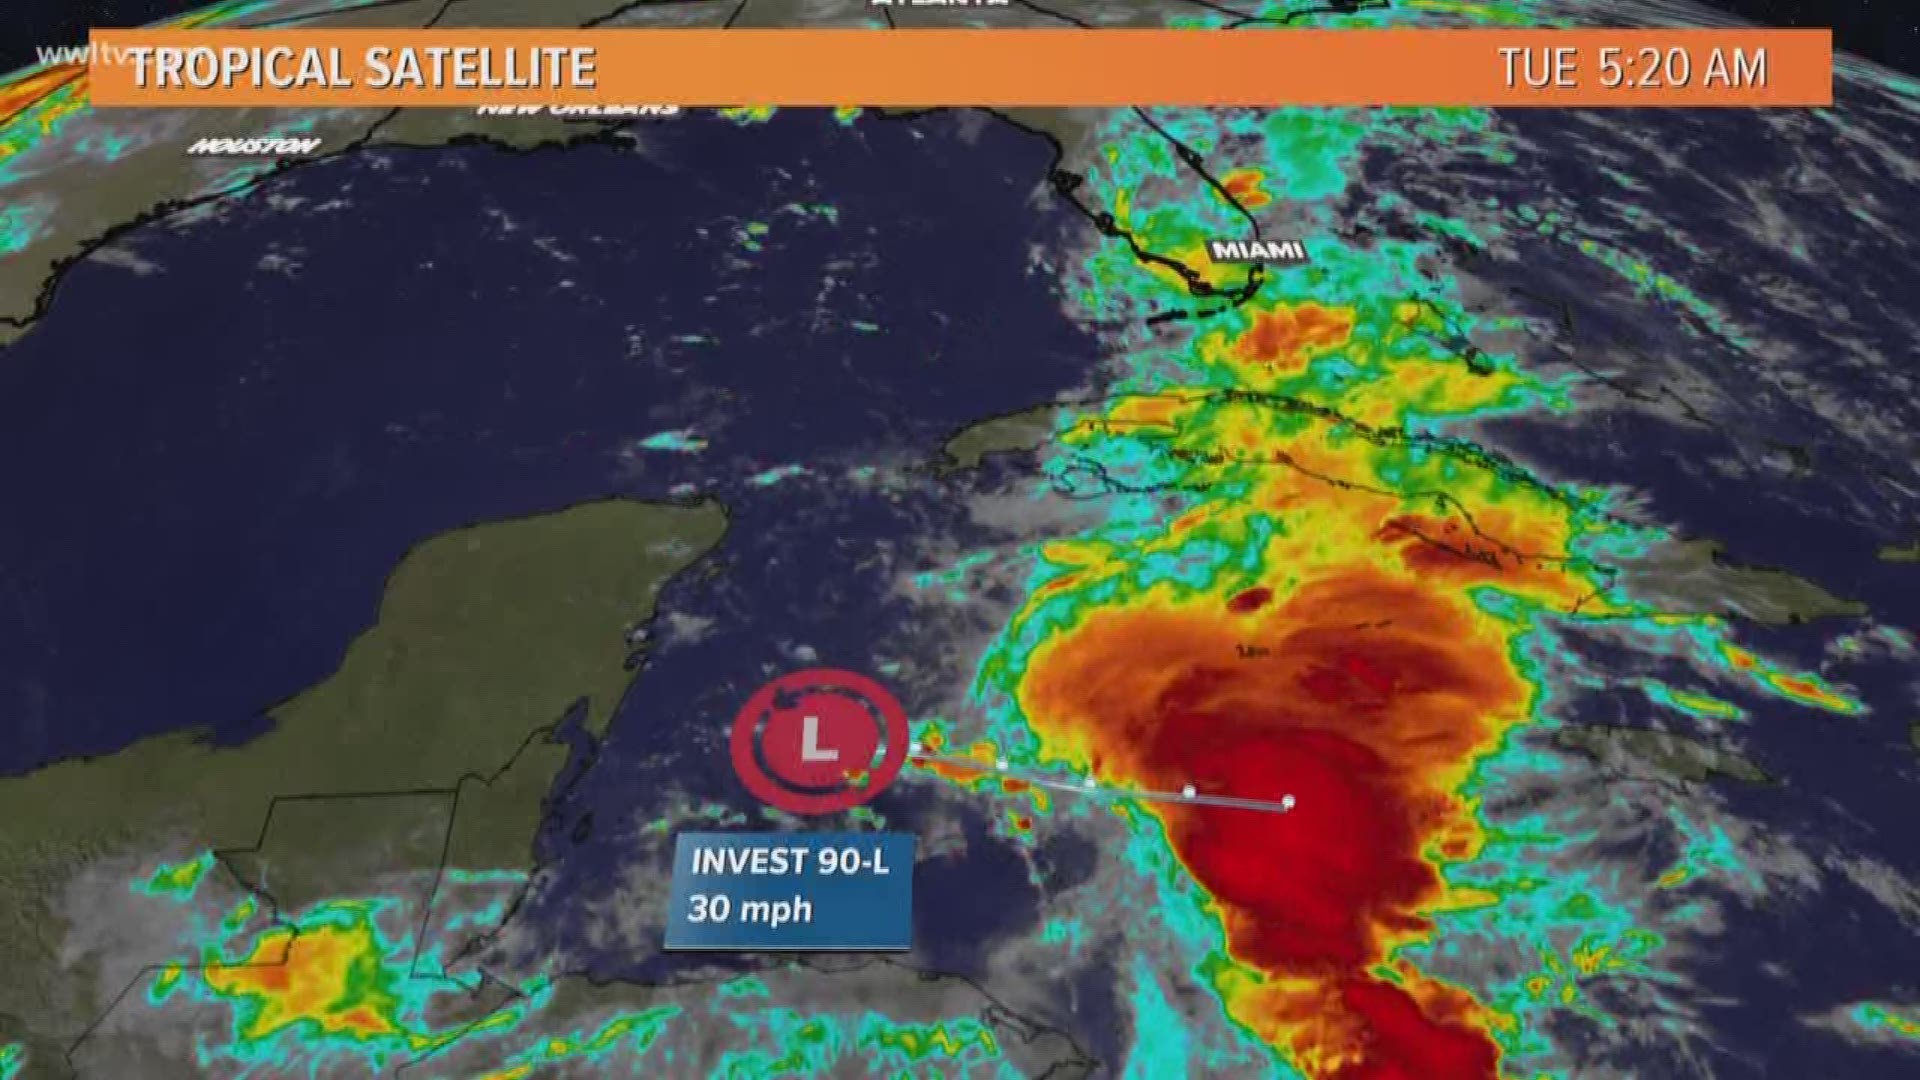 Invest 90 could bring heavy rains this weekend